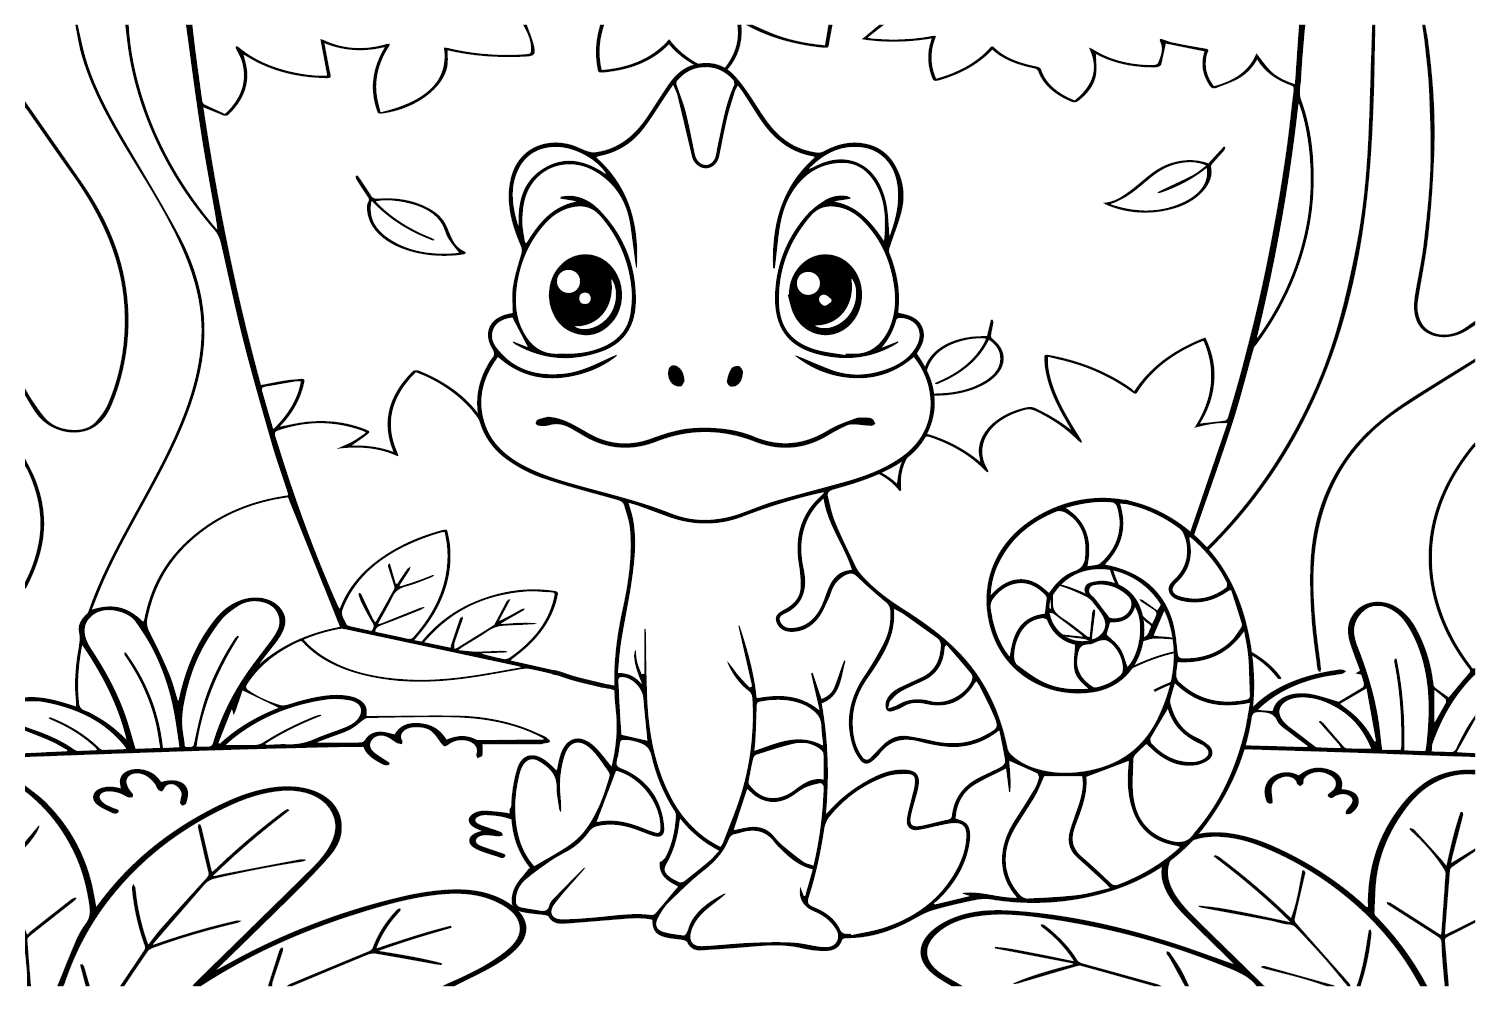 Kawaii Chameleon Coloring Page from Chameleon